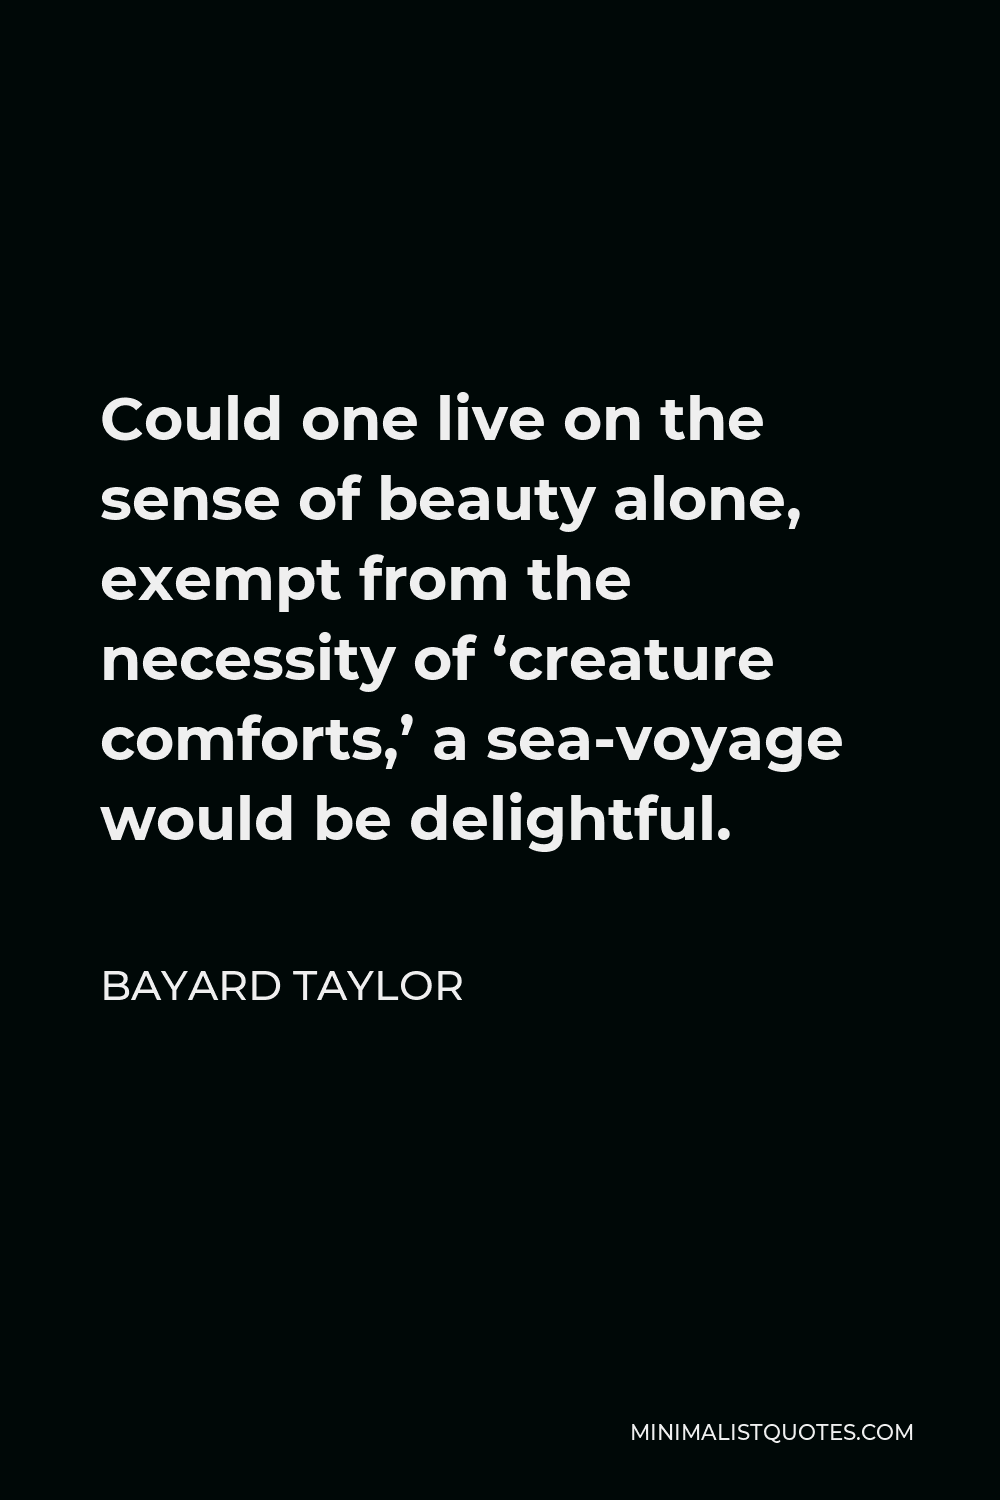 Bayard Taylor Quote - Could one live on the sense of beauty alone, exempt from the necessity of ‘creature comforts,’ a sea-voyage would be delightful.